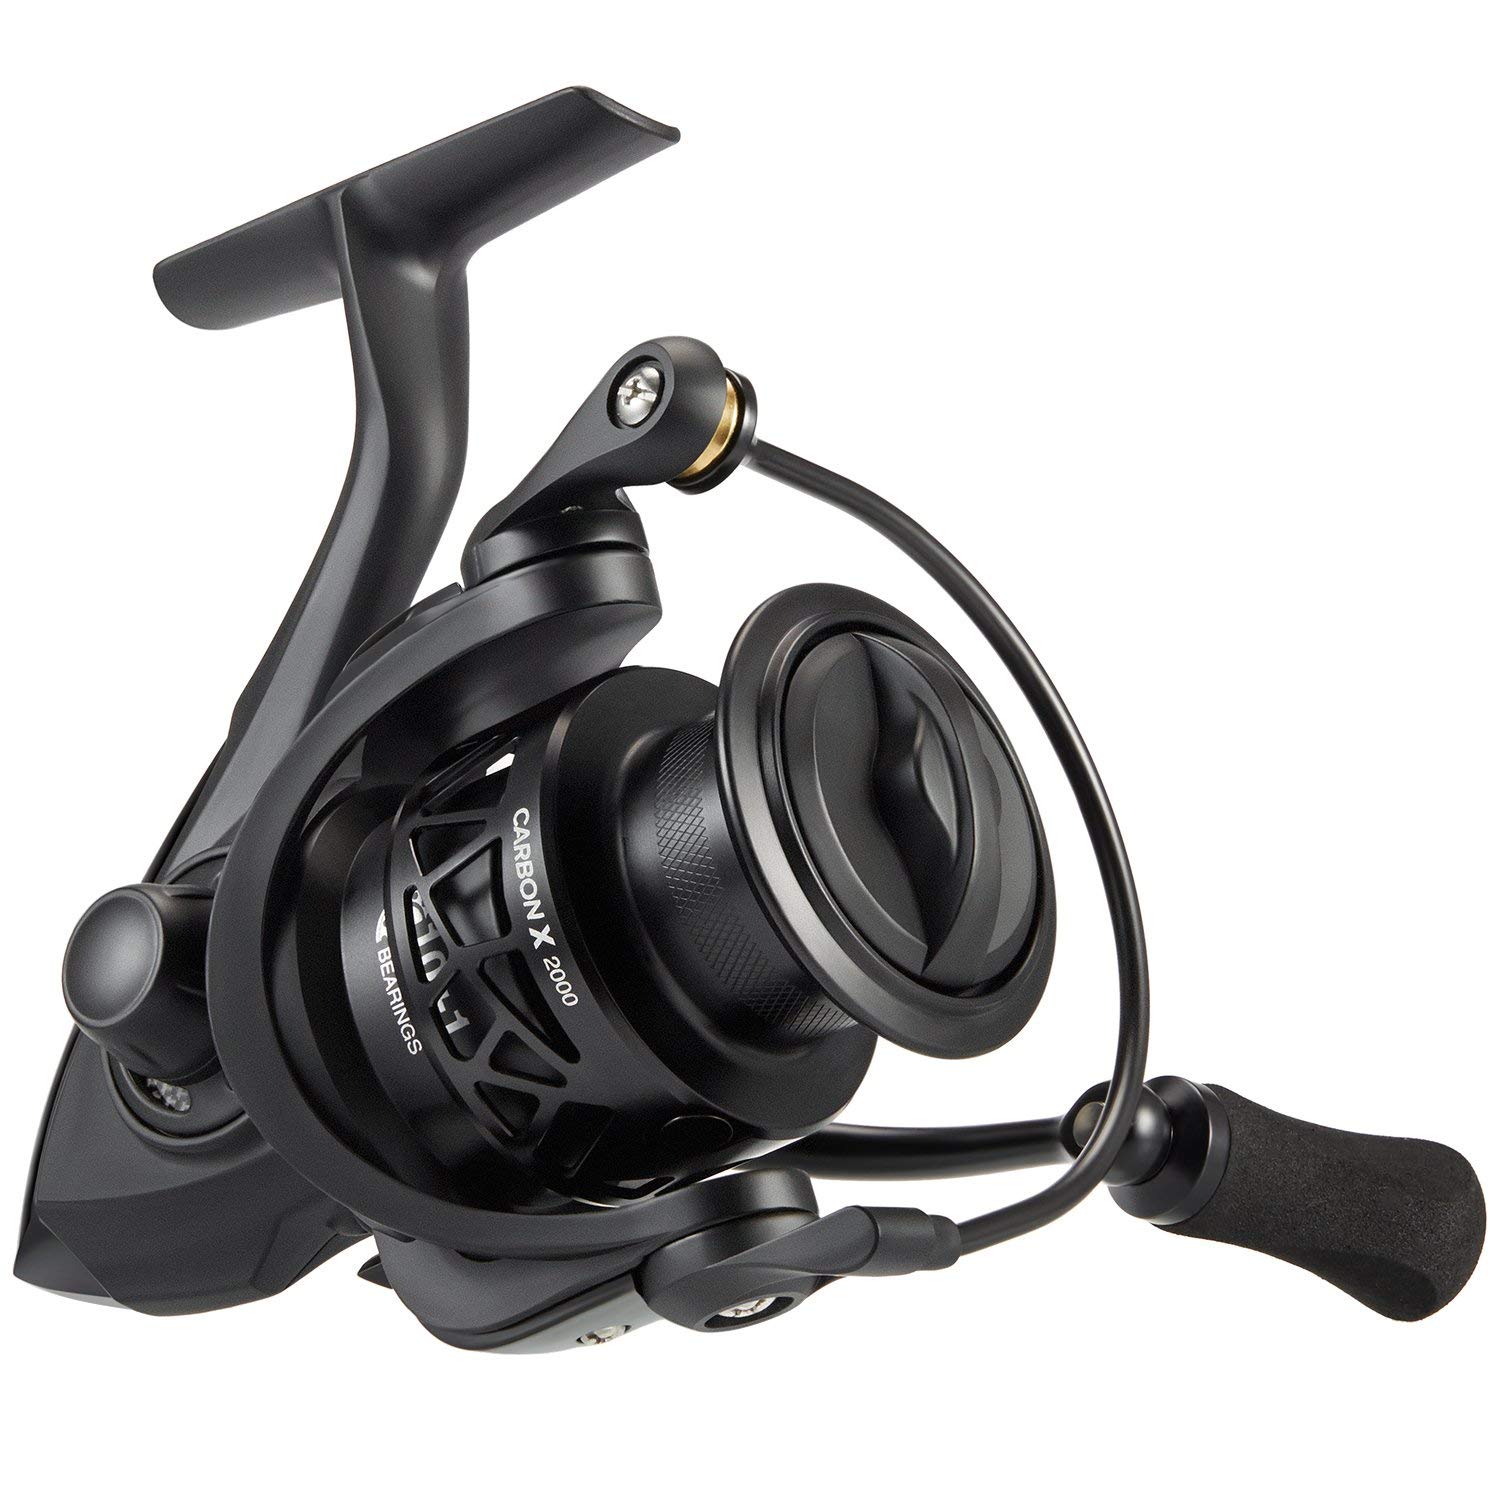 Piscifun Carbon X 2000 Spinning Reel